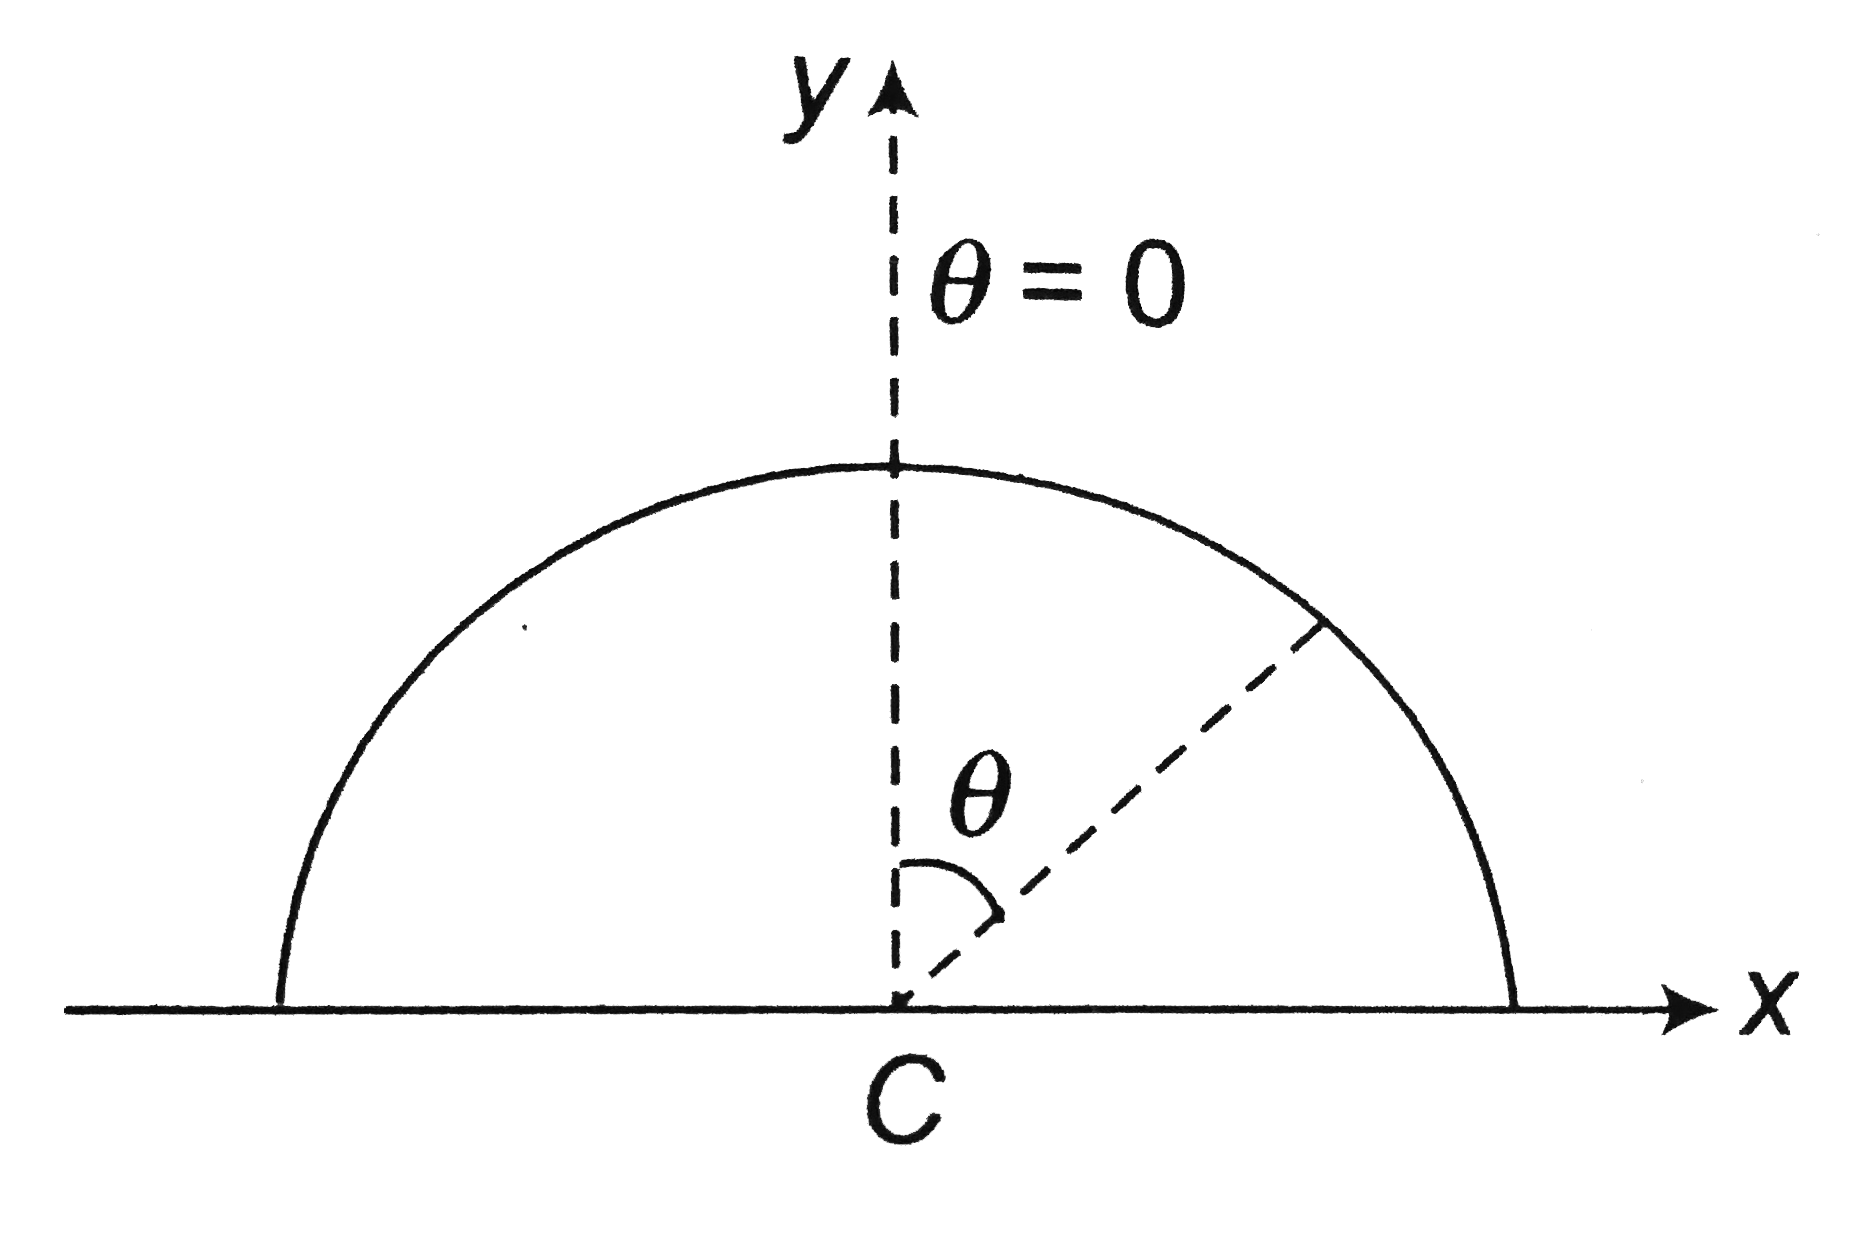 A semicircular wire is uniformly charged with linear charge density dependent on the angle theta from y-direction as lambda=lambda(0) |sin theta|, where lambda(0) is a constant. The electric field intensity at the centre of the arc is